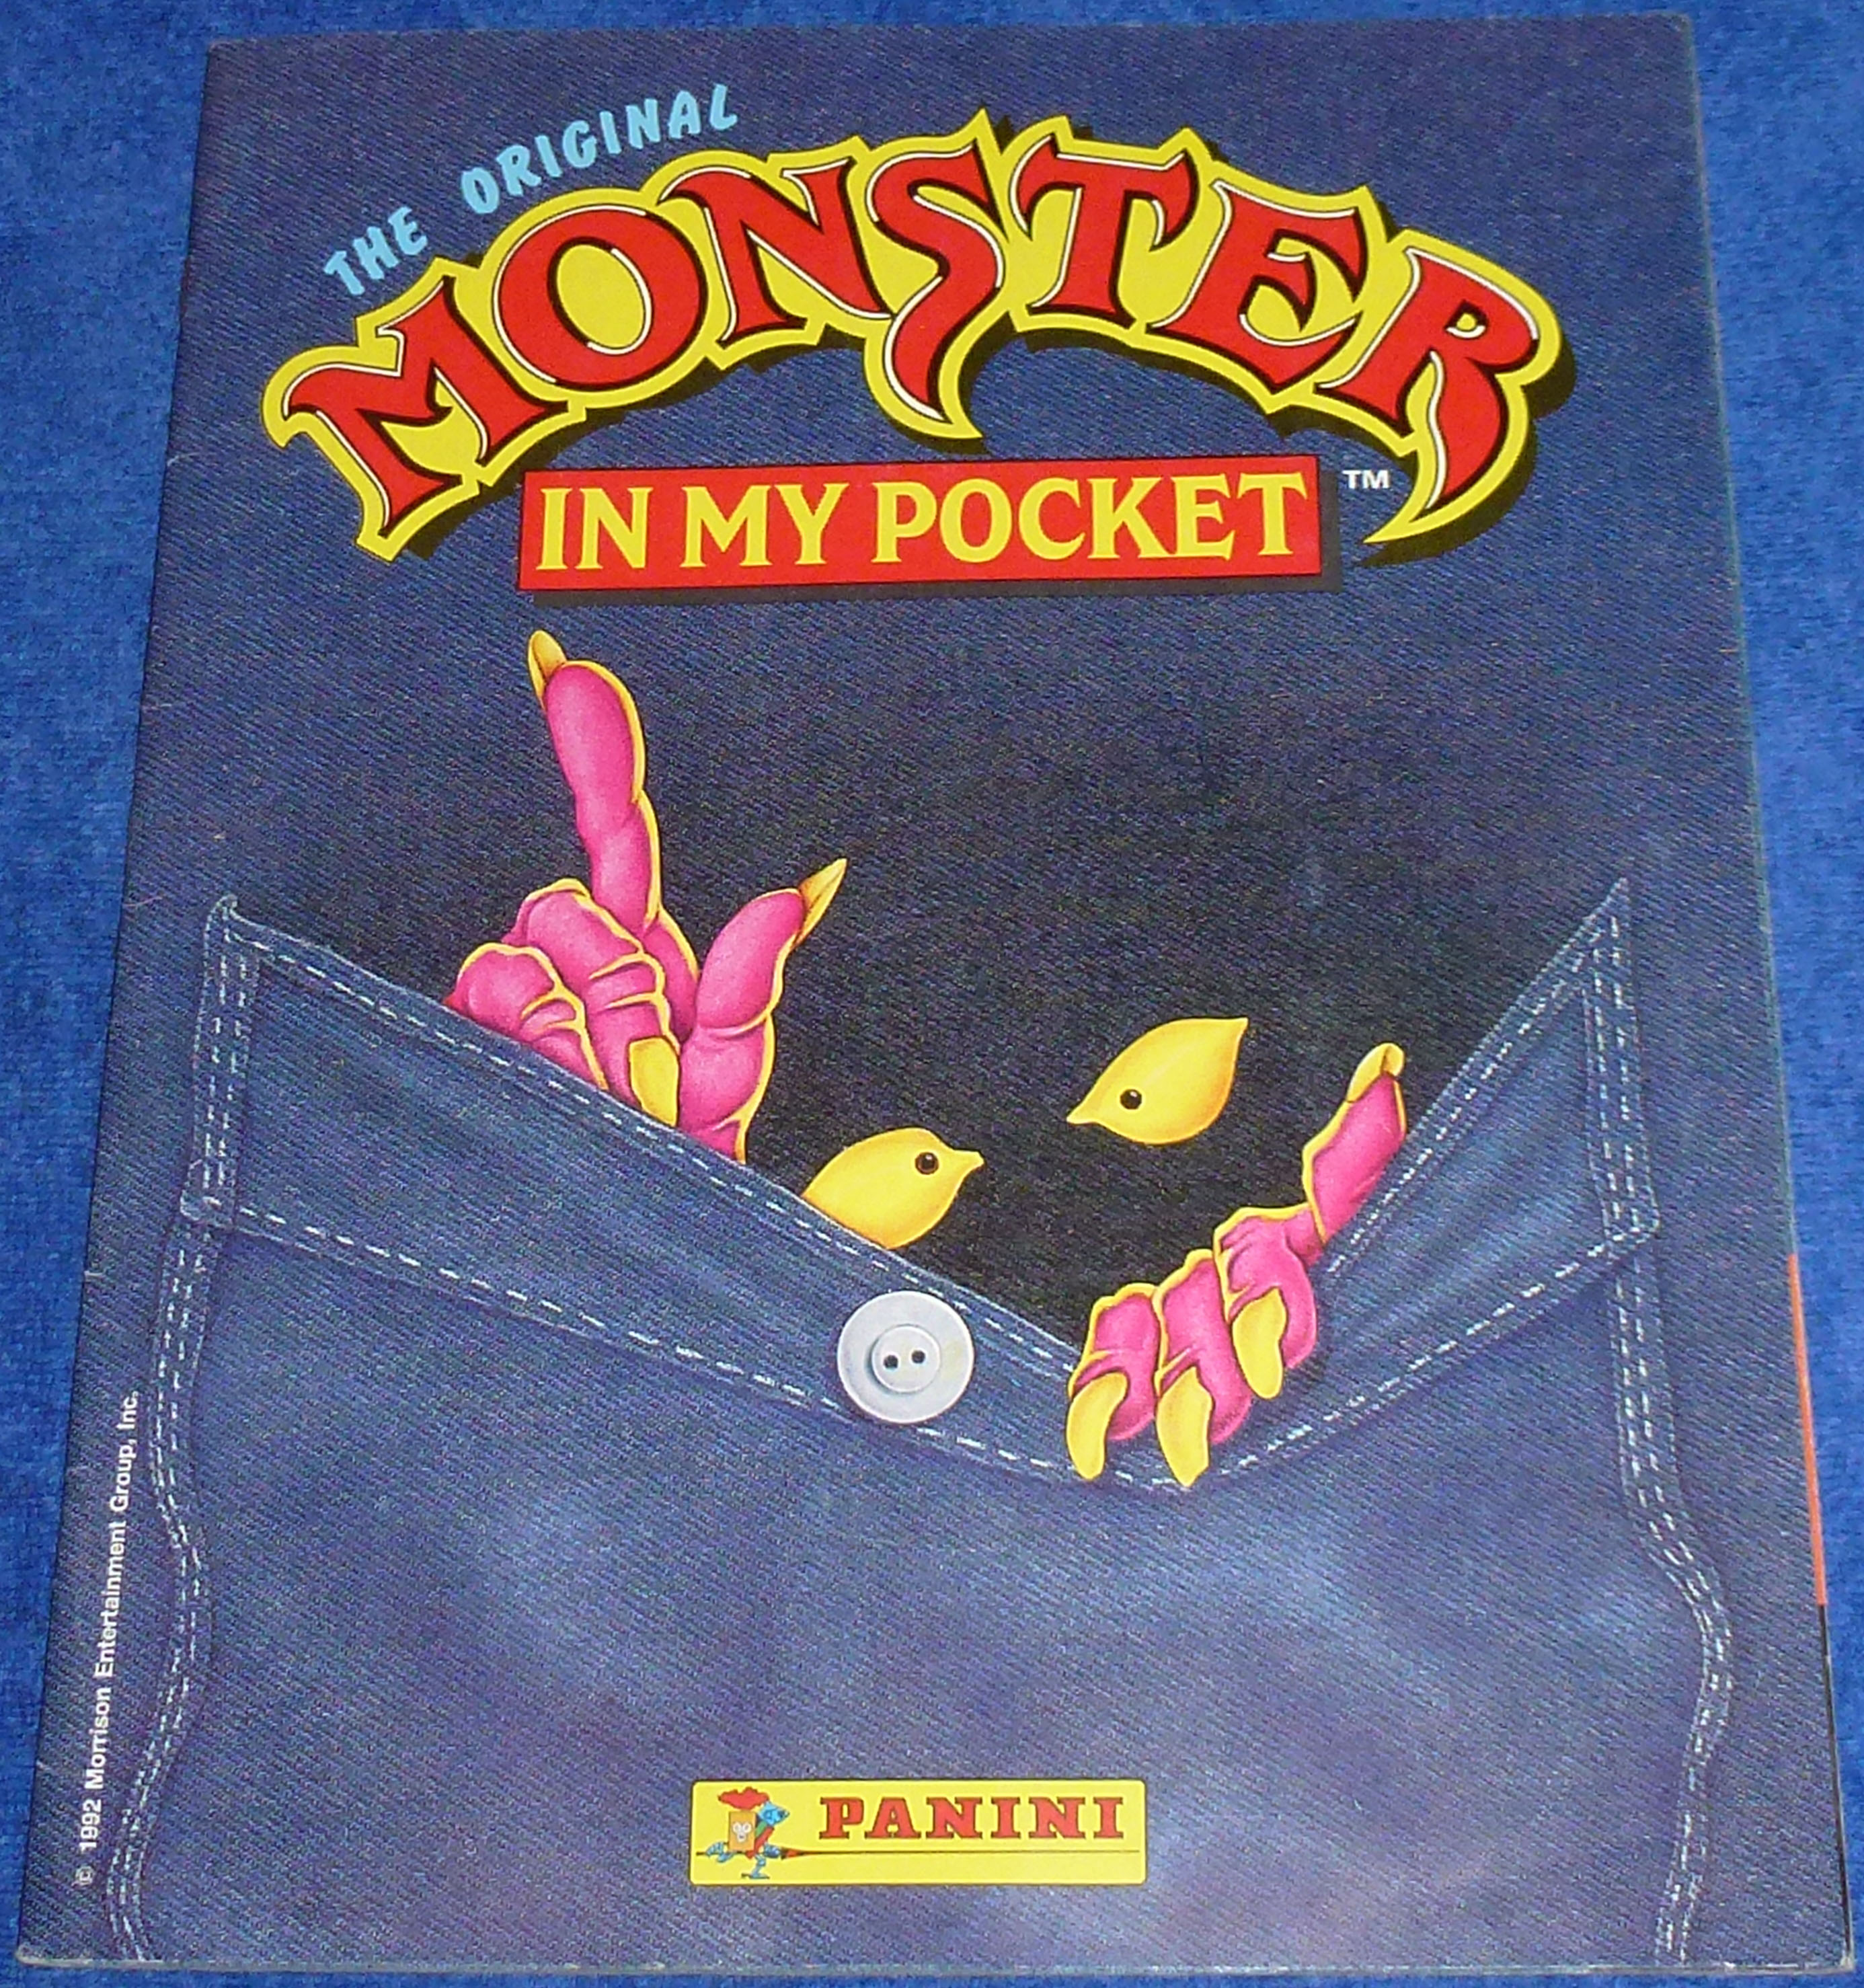 http://www.micromo.es/wp-content/uploads/2012/11/The-original-Monster-in-my-pocket-01.jpg